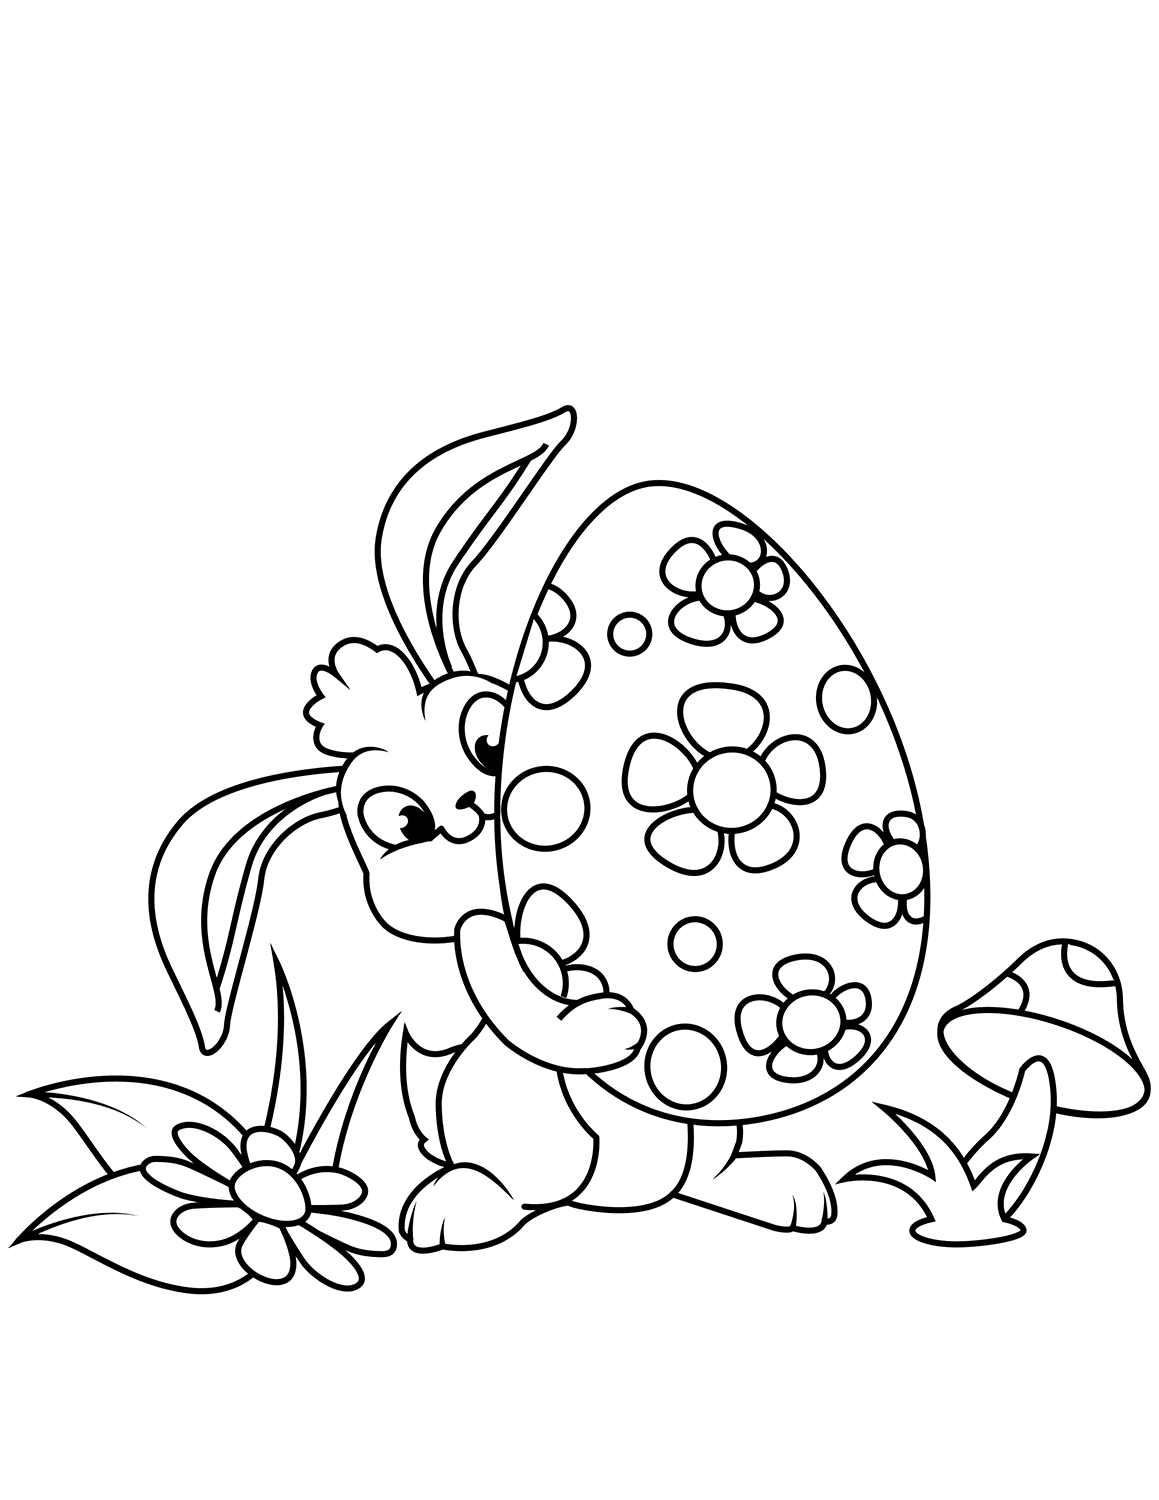 Cute Easter Bunny And Egg Coloring Page